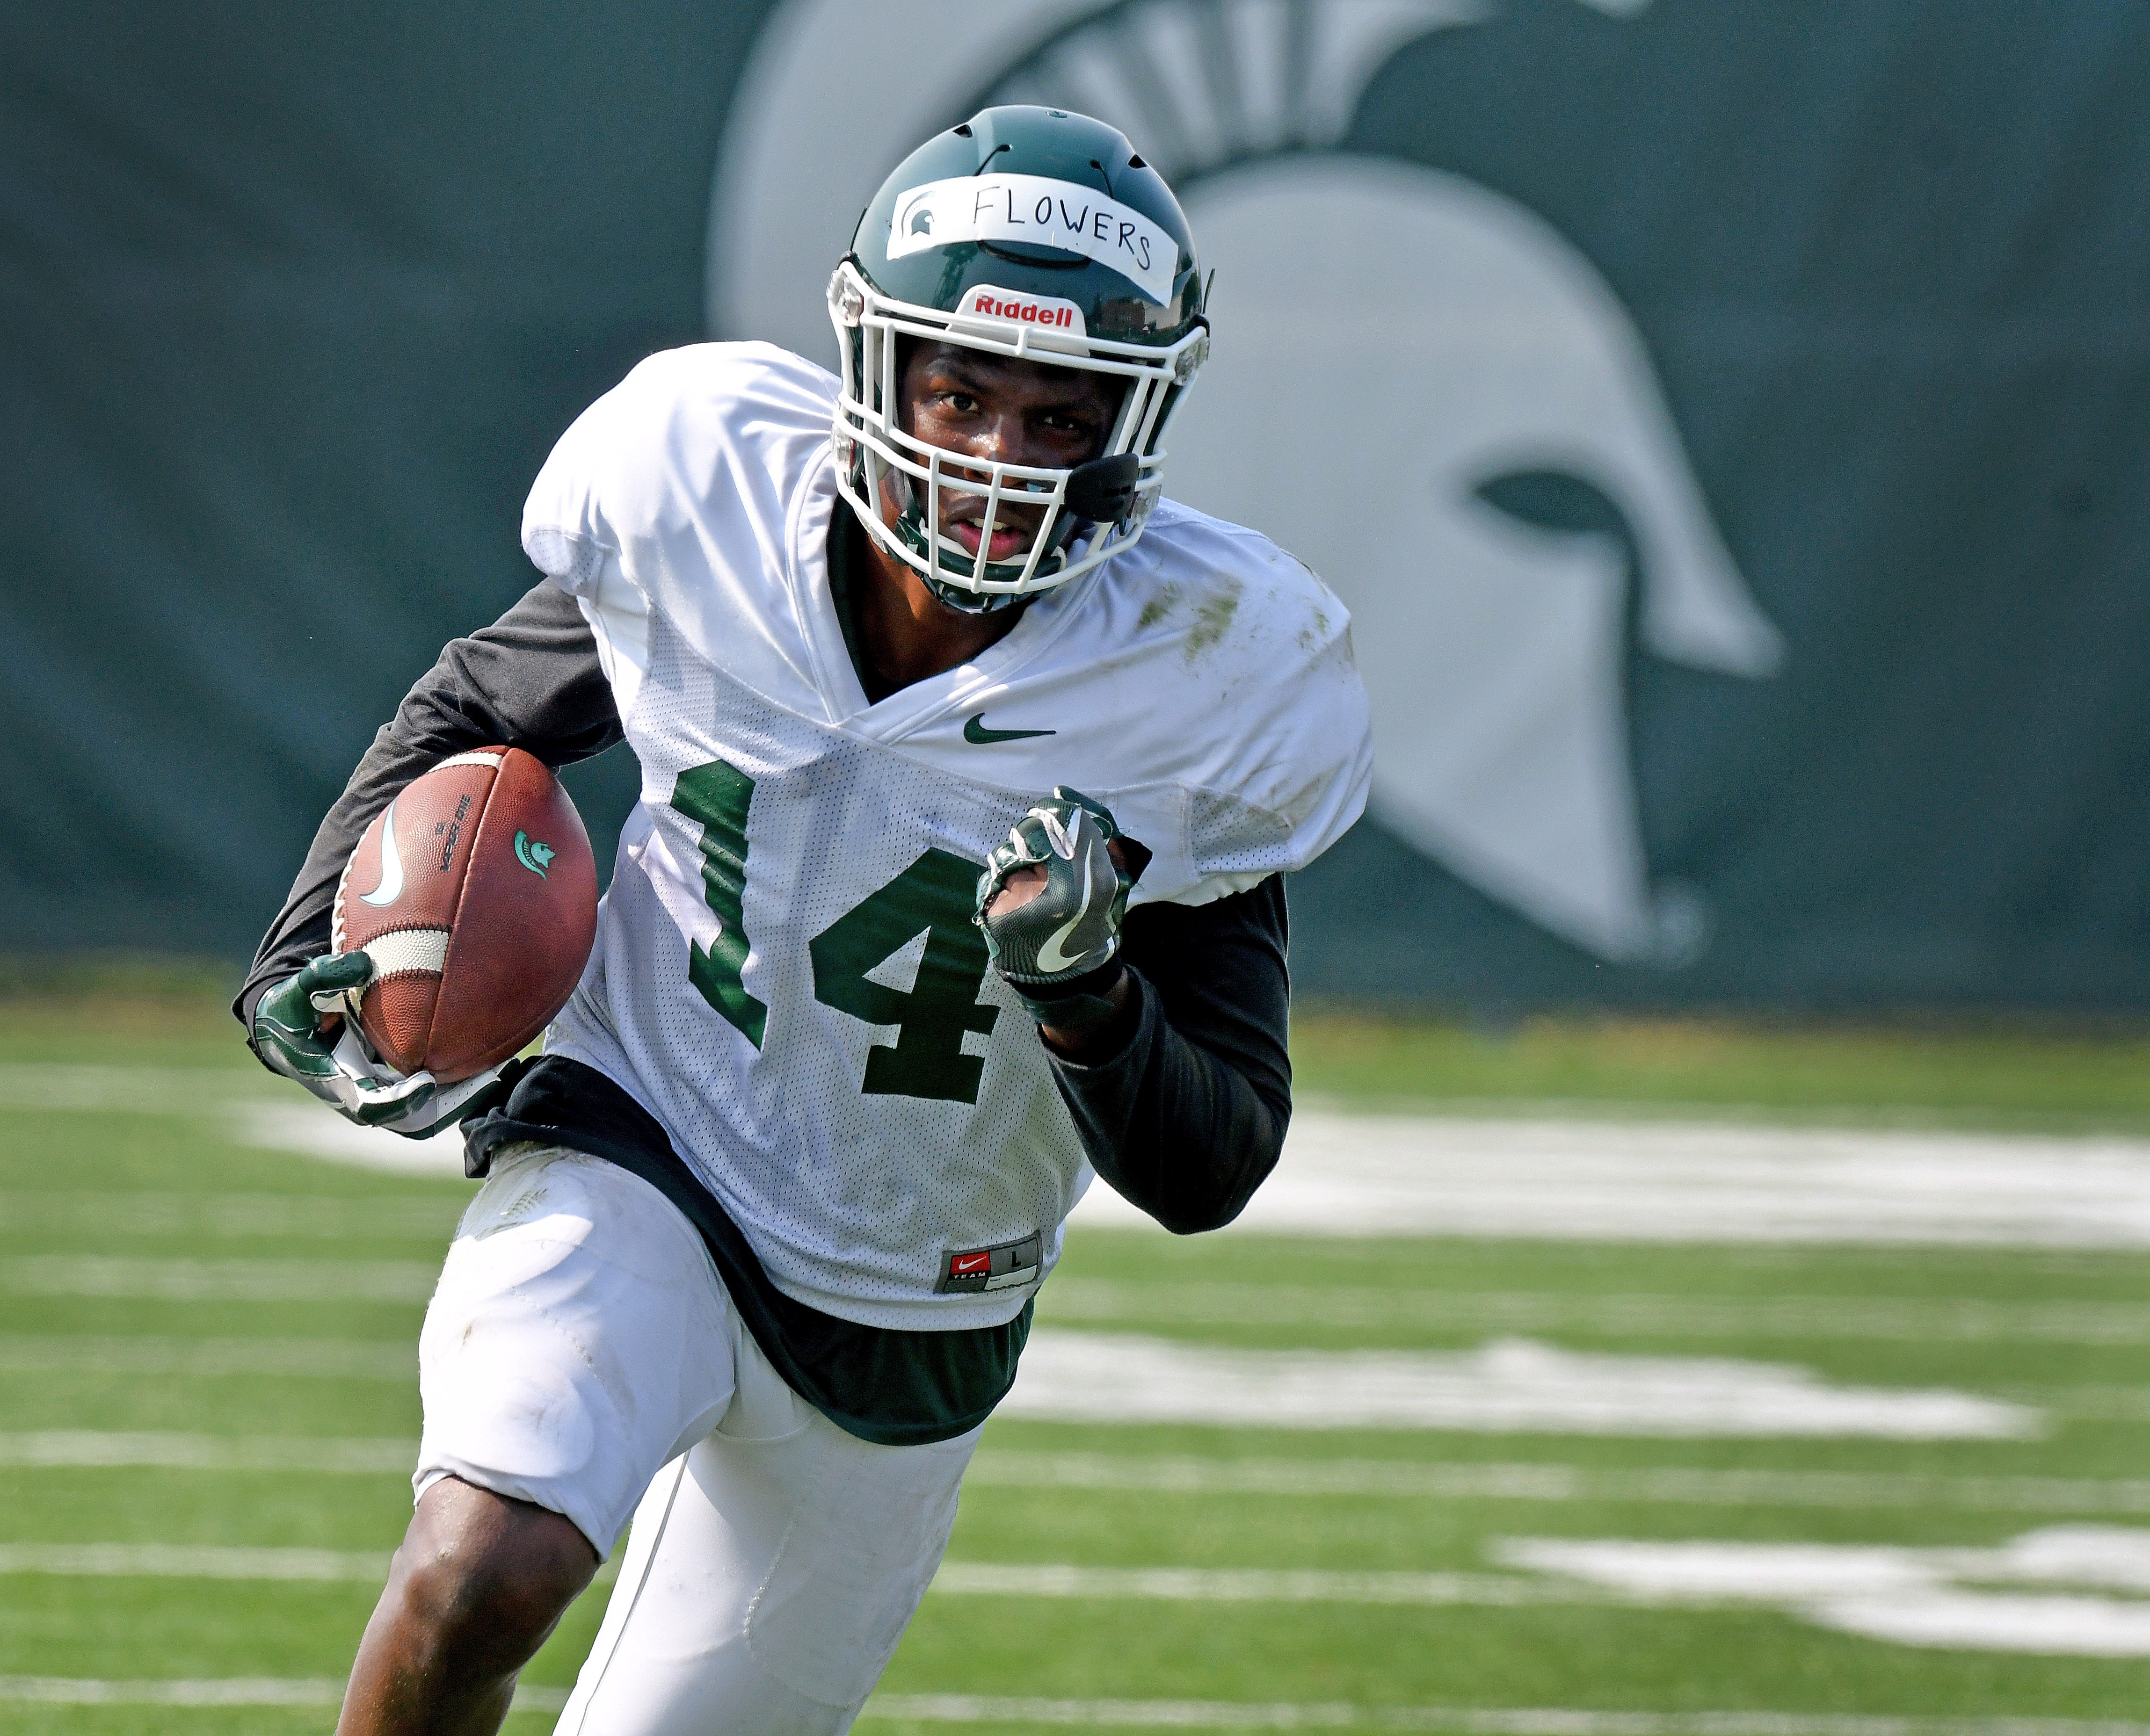 Michigan State receiver Emmanuel Flowers turns upfield with the football.